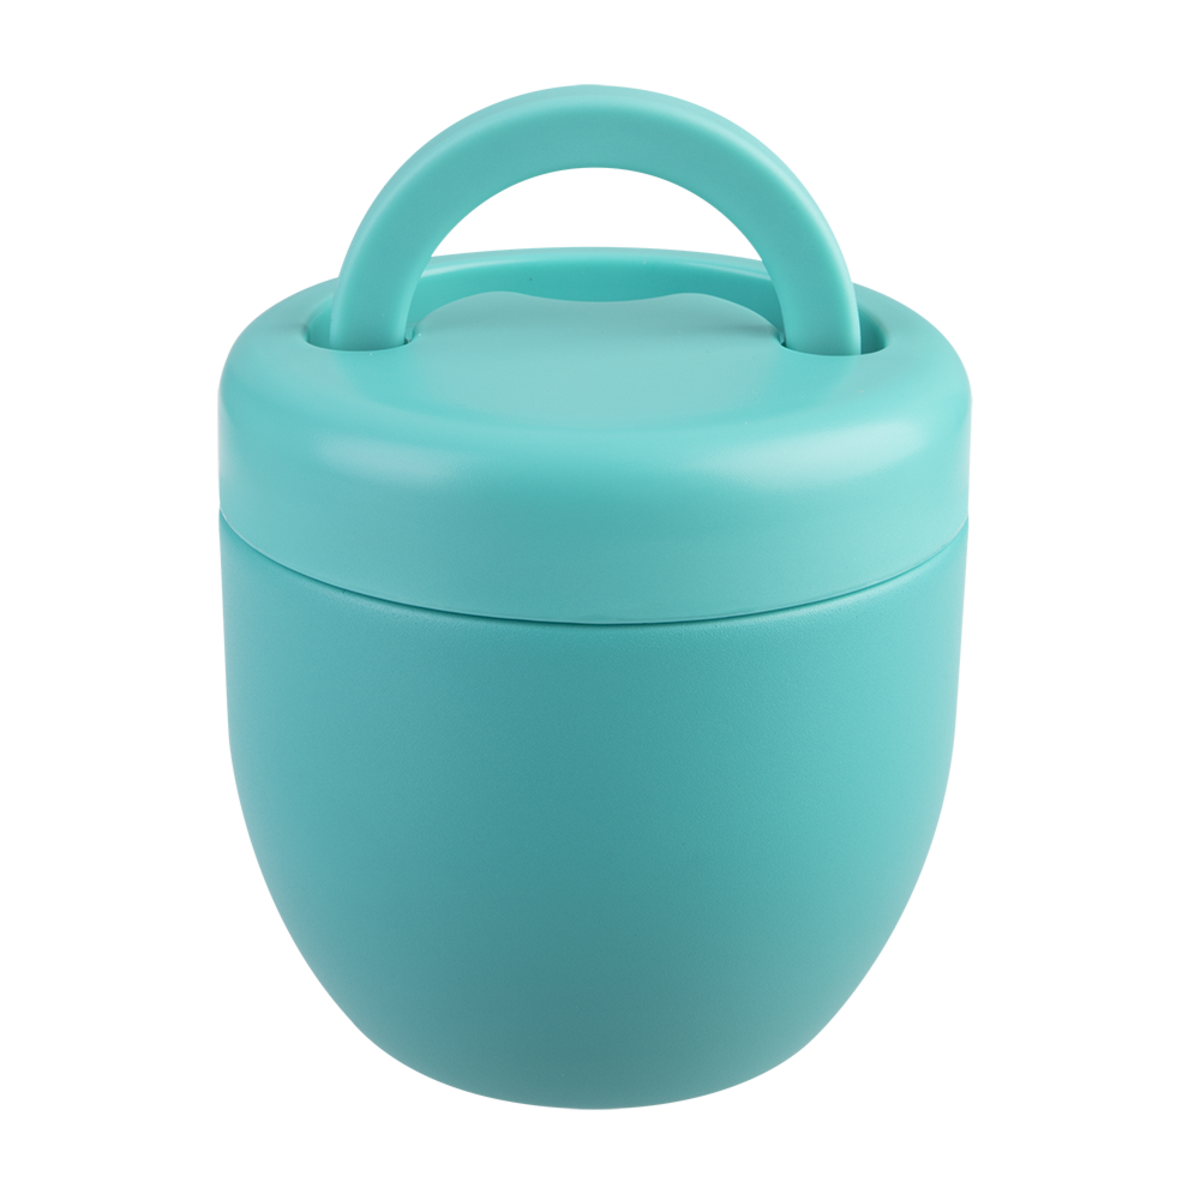 OASIS STAINLESS STEEL DOUBLE WALL INSULATED FOOD POD 470ML - TURQUOISE